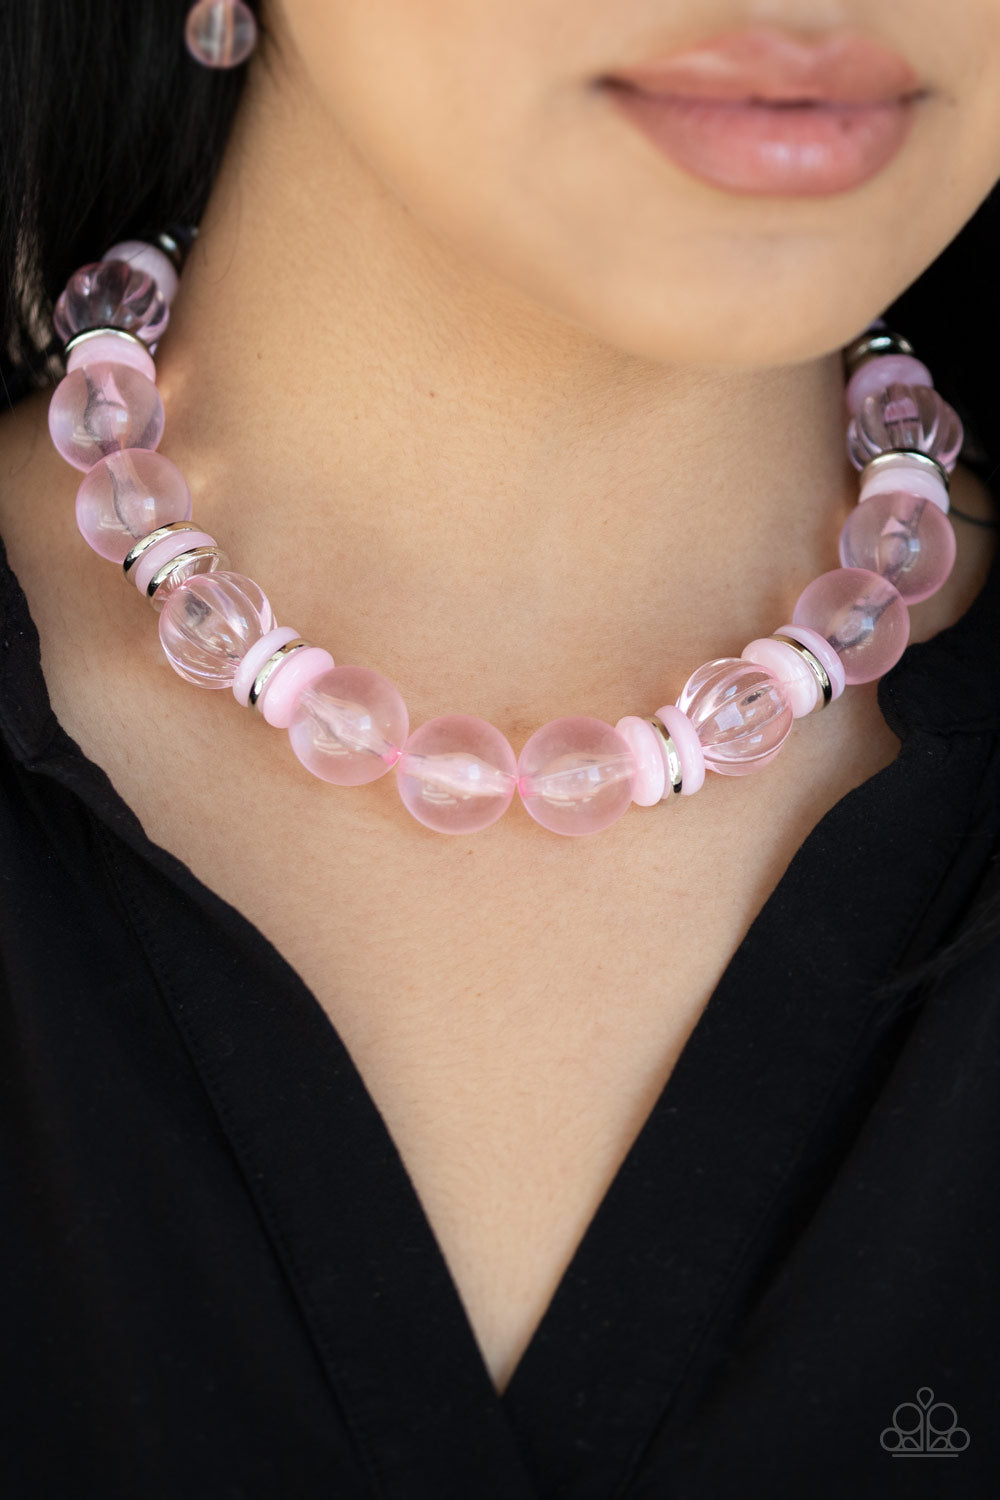 Bubbly Beauty Pink Necklace - Paparazzi Accessories  Featuring dainty silver and pink acrylic discs, a collection of oversized glassy pink beads are threaded along an invisible wire below the collar for a colorfully bubbly look. Features an adjustable clasp closure.  All Paparazzi Accessories are lead free and nickel free!  Sold as one individual necklace. Includes one pair of matching earrings.